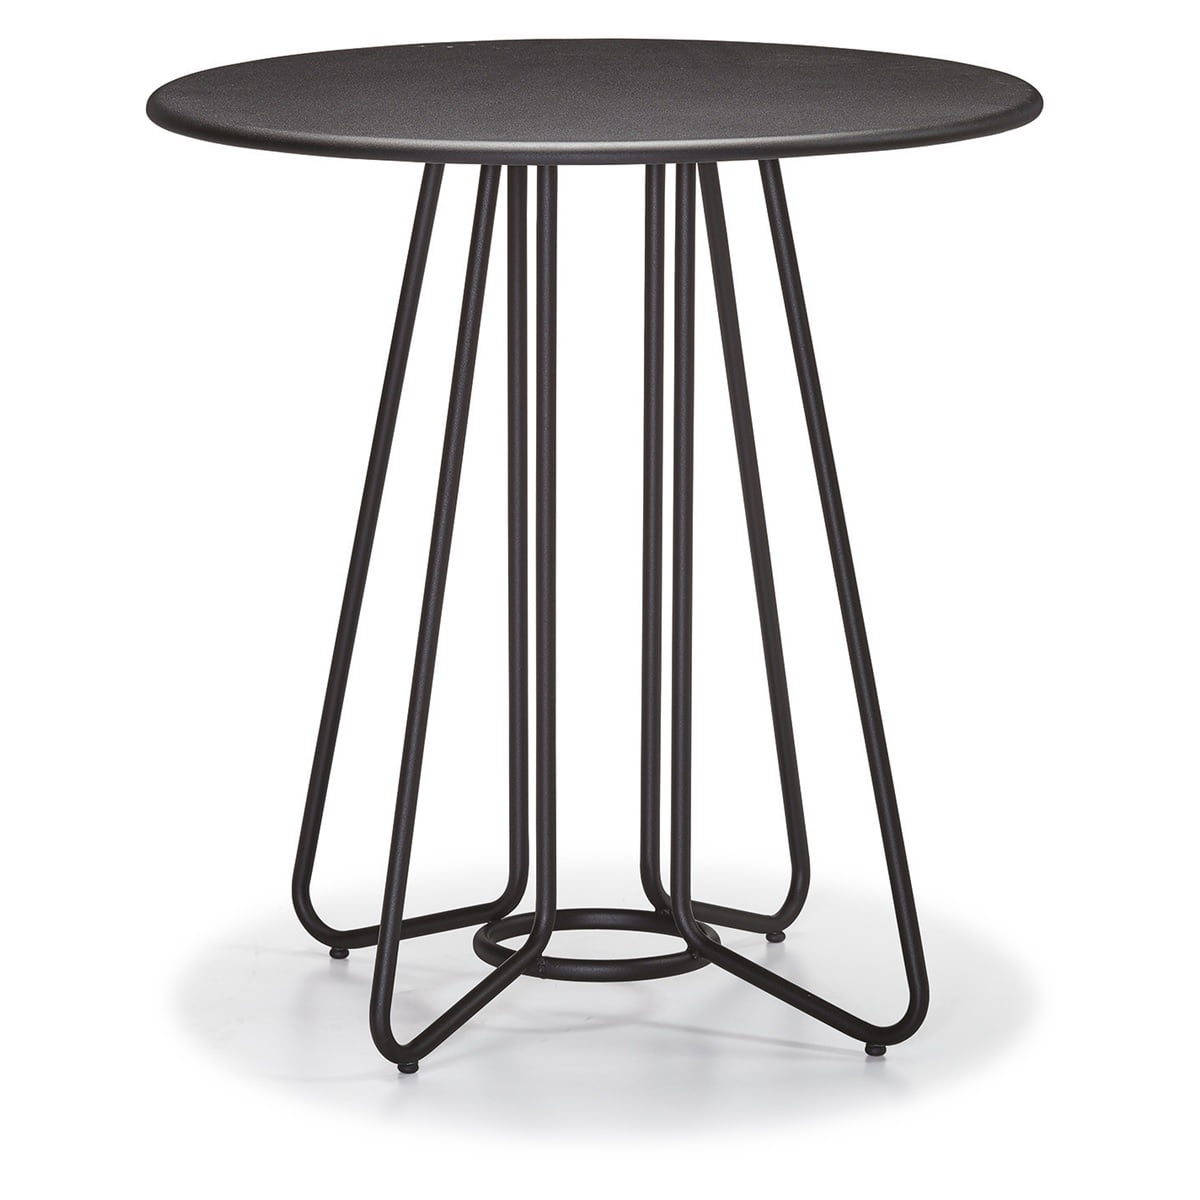 Neo 254244e Round Metal Dining Table, Round Metal Dining Table And Chairs